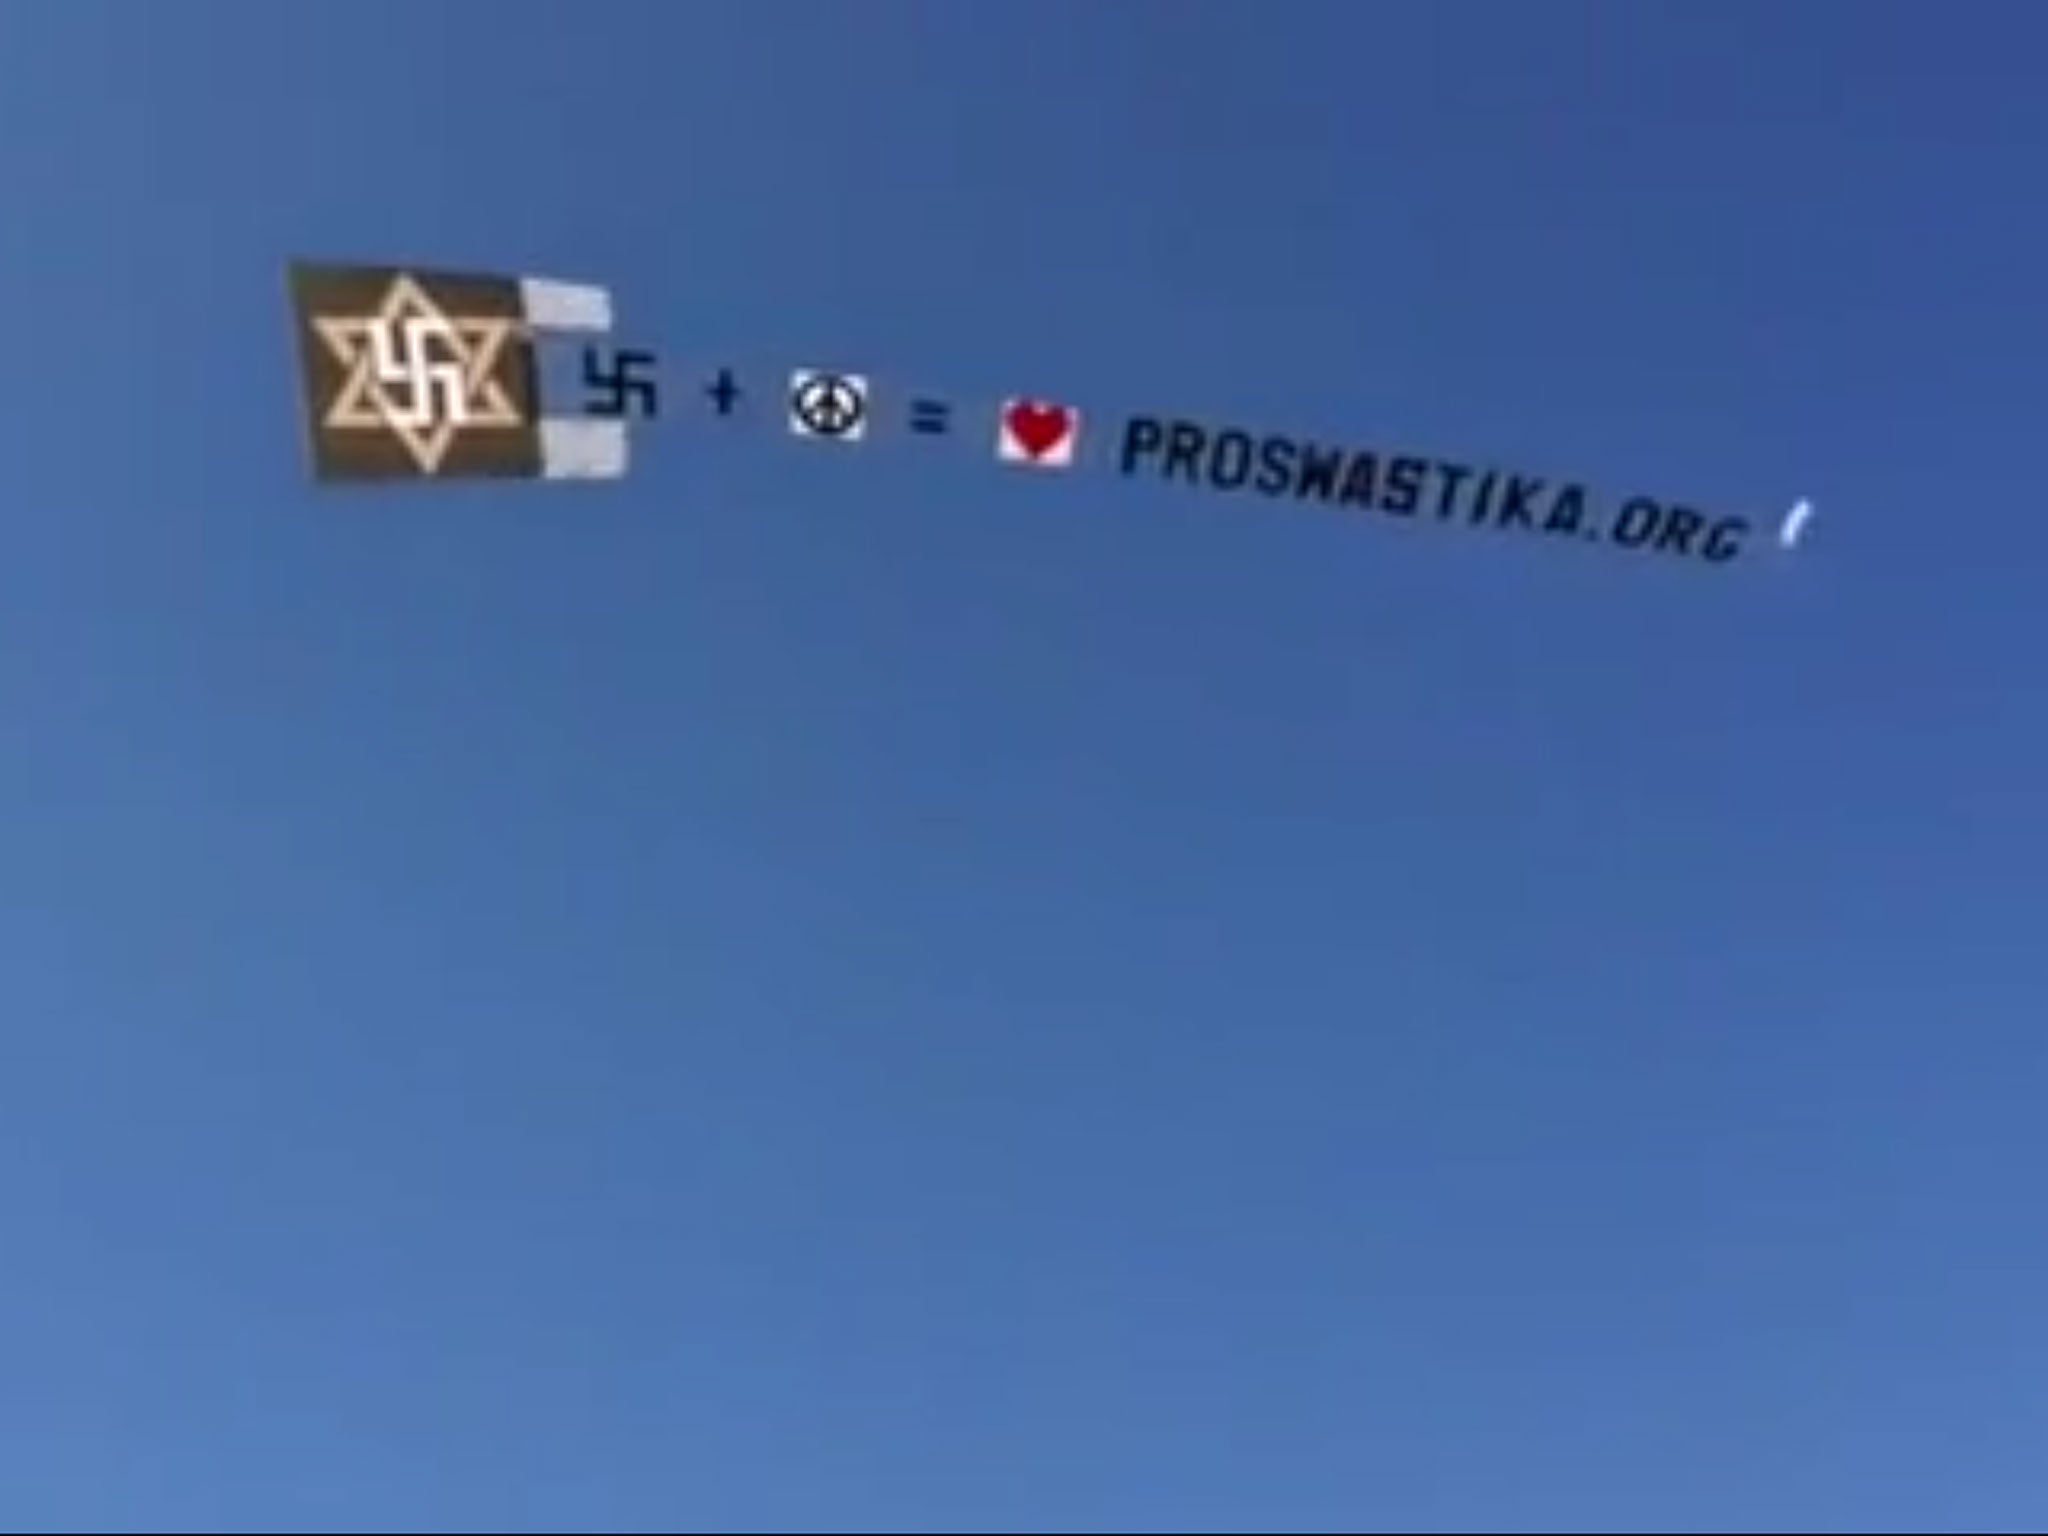 The International Raelian Movement flew the swastika symbol over Coney Island in southern Brooklyn in a bid to promote its original peaceful meaning. However, the religious group flew the banner over an area housing the largest remaining number of World W